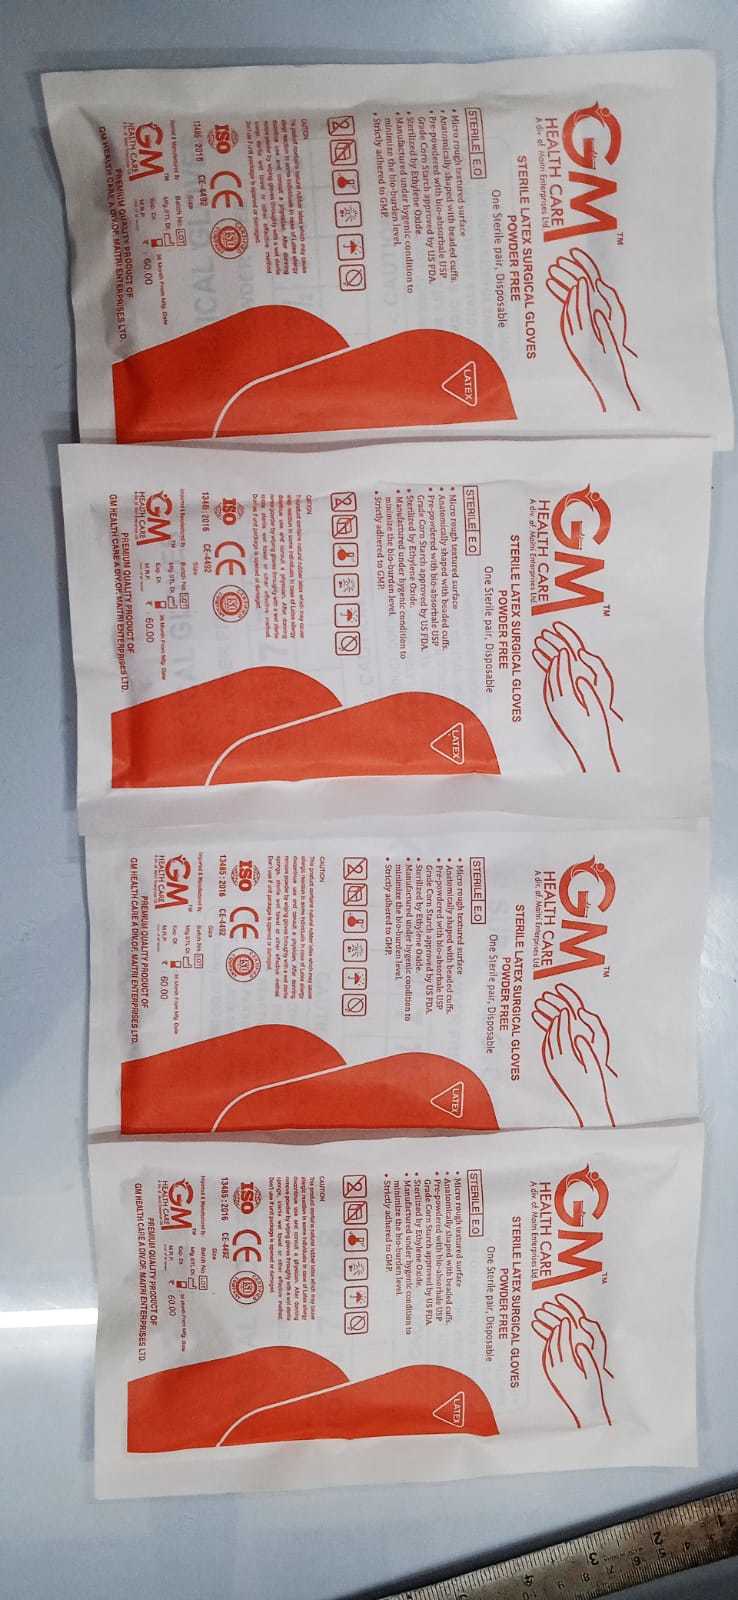 GM LATEX SURGICAL STERILE POWDER FREE GLOVES